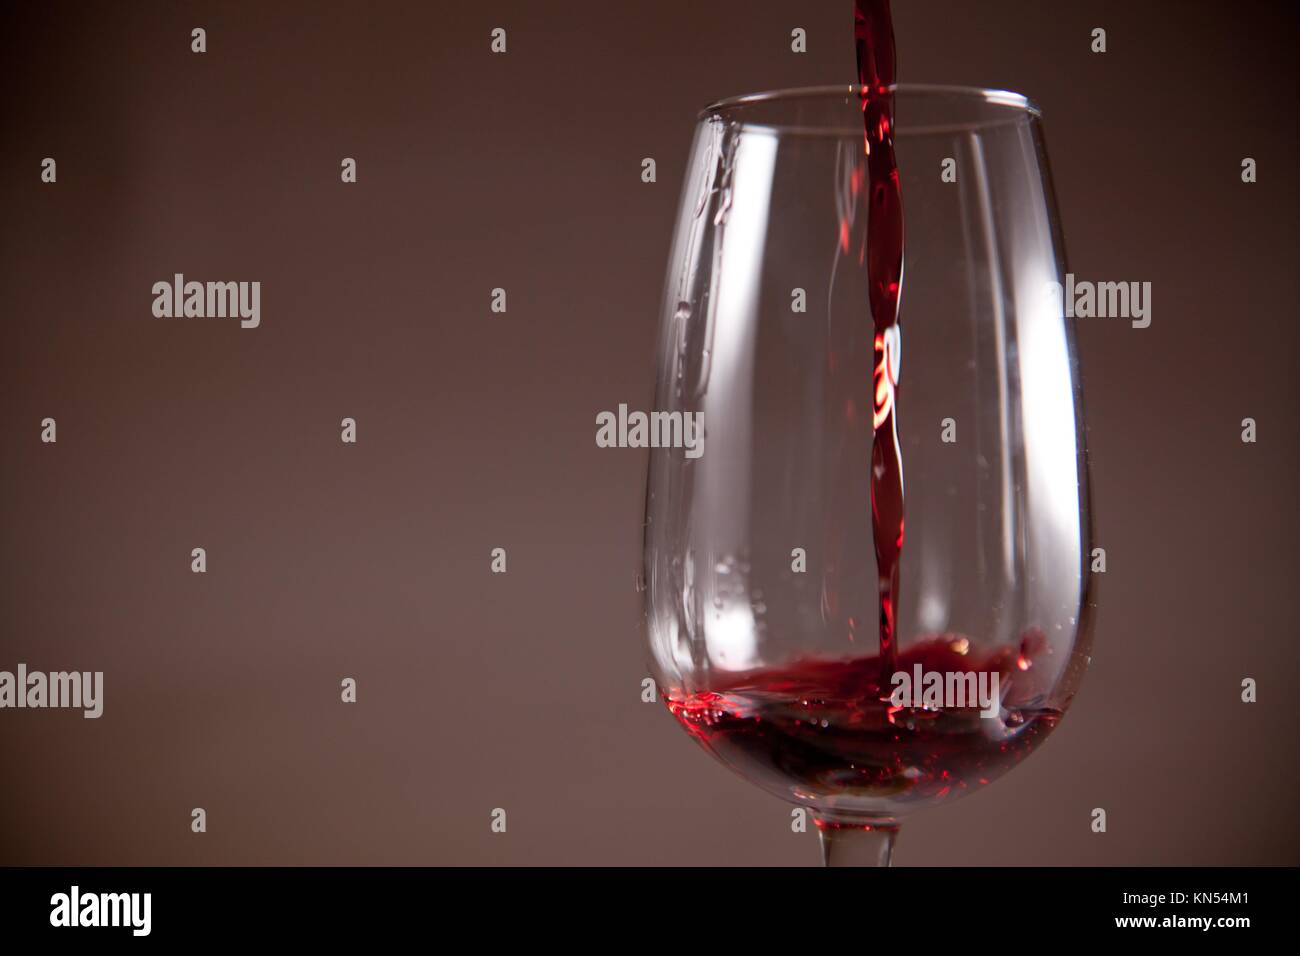 Glass with red wine poured on a cup. Isolated over dark background. Stock Photo